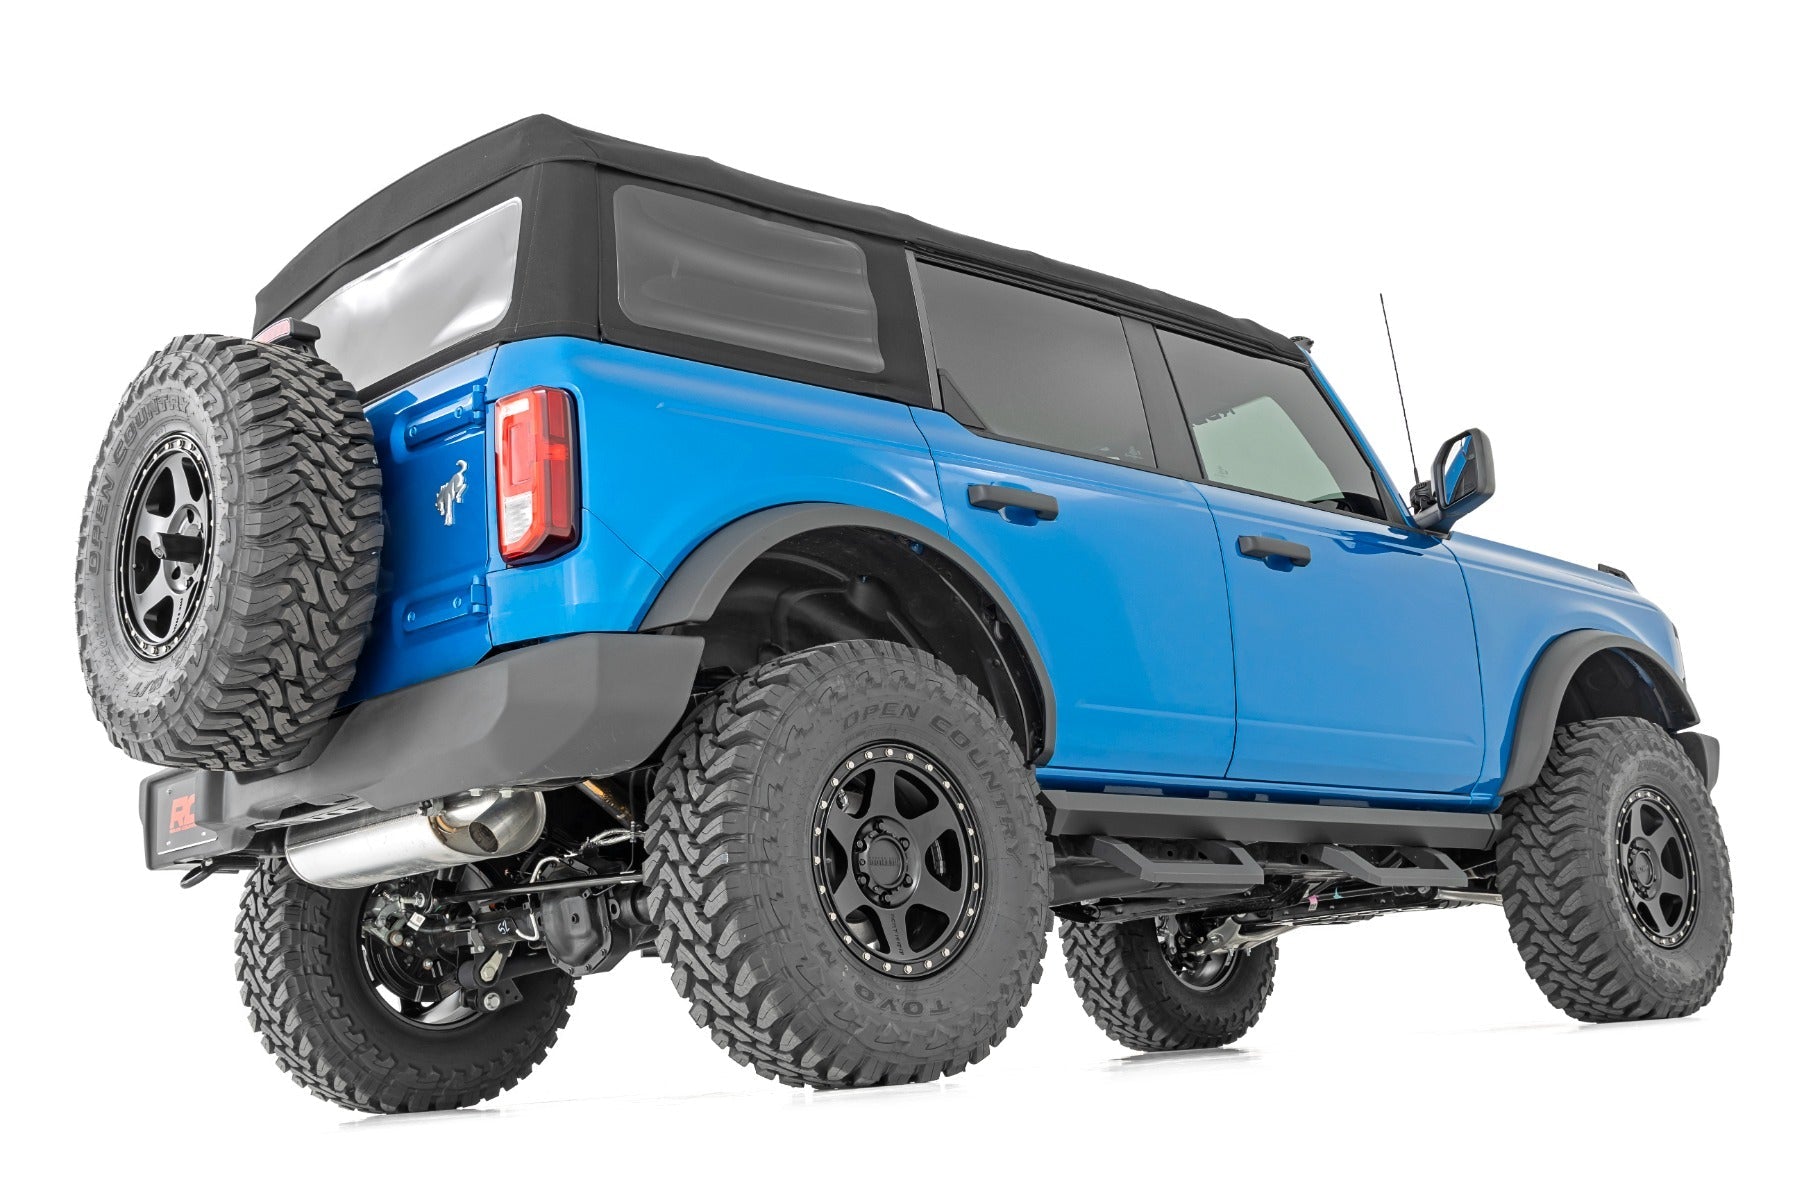 Ford Bronco 3.5 Inch Lift Kit  | Rough Country